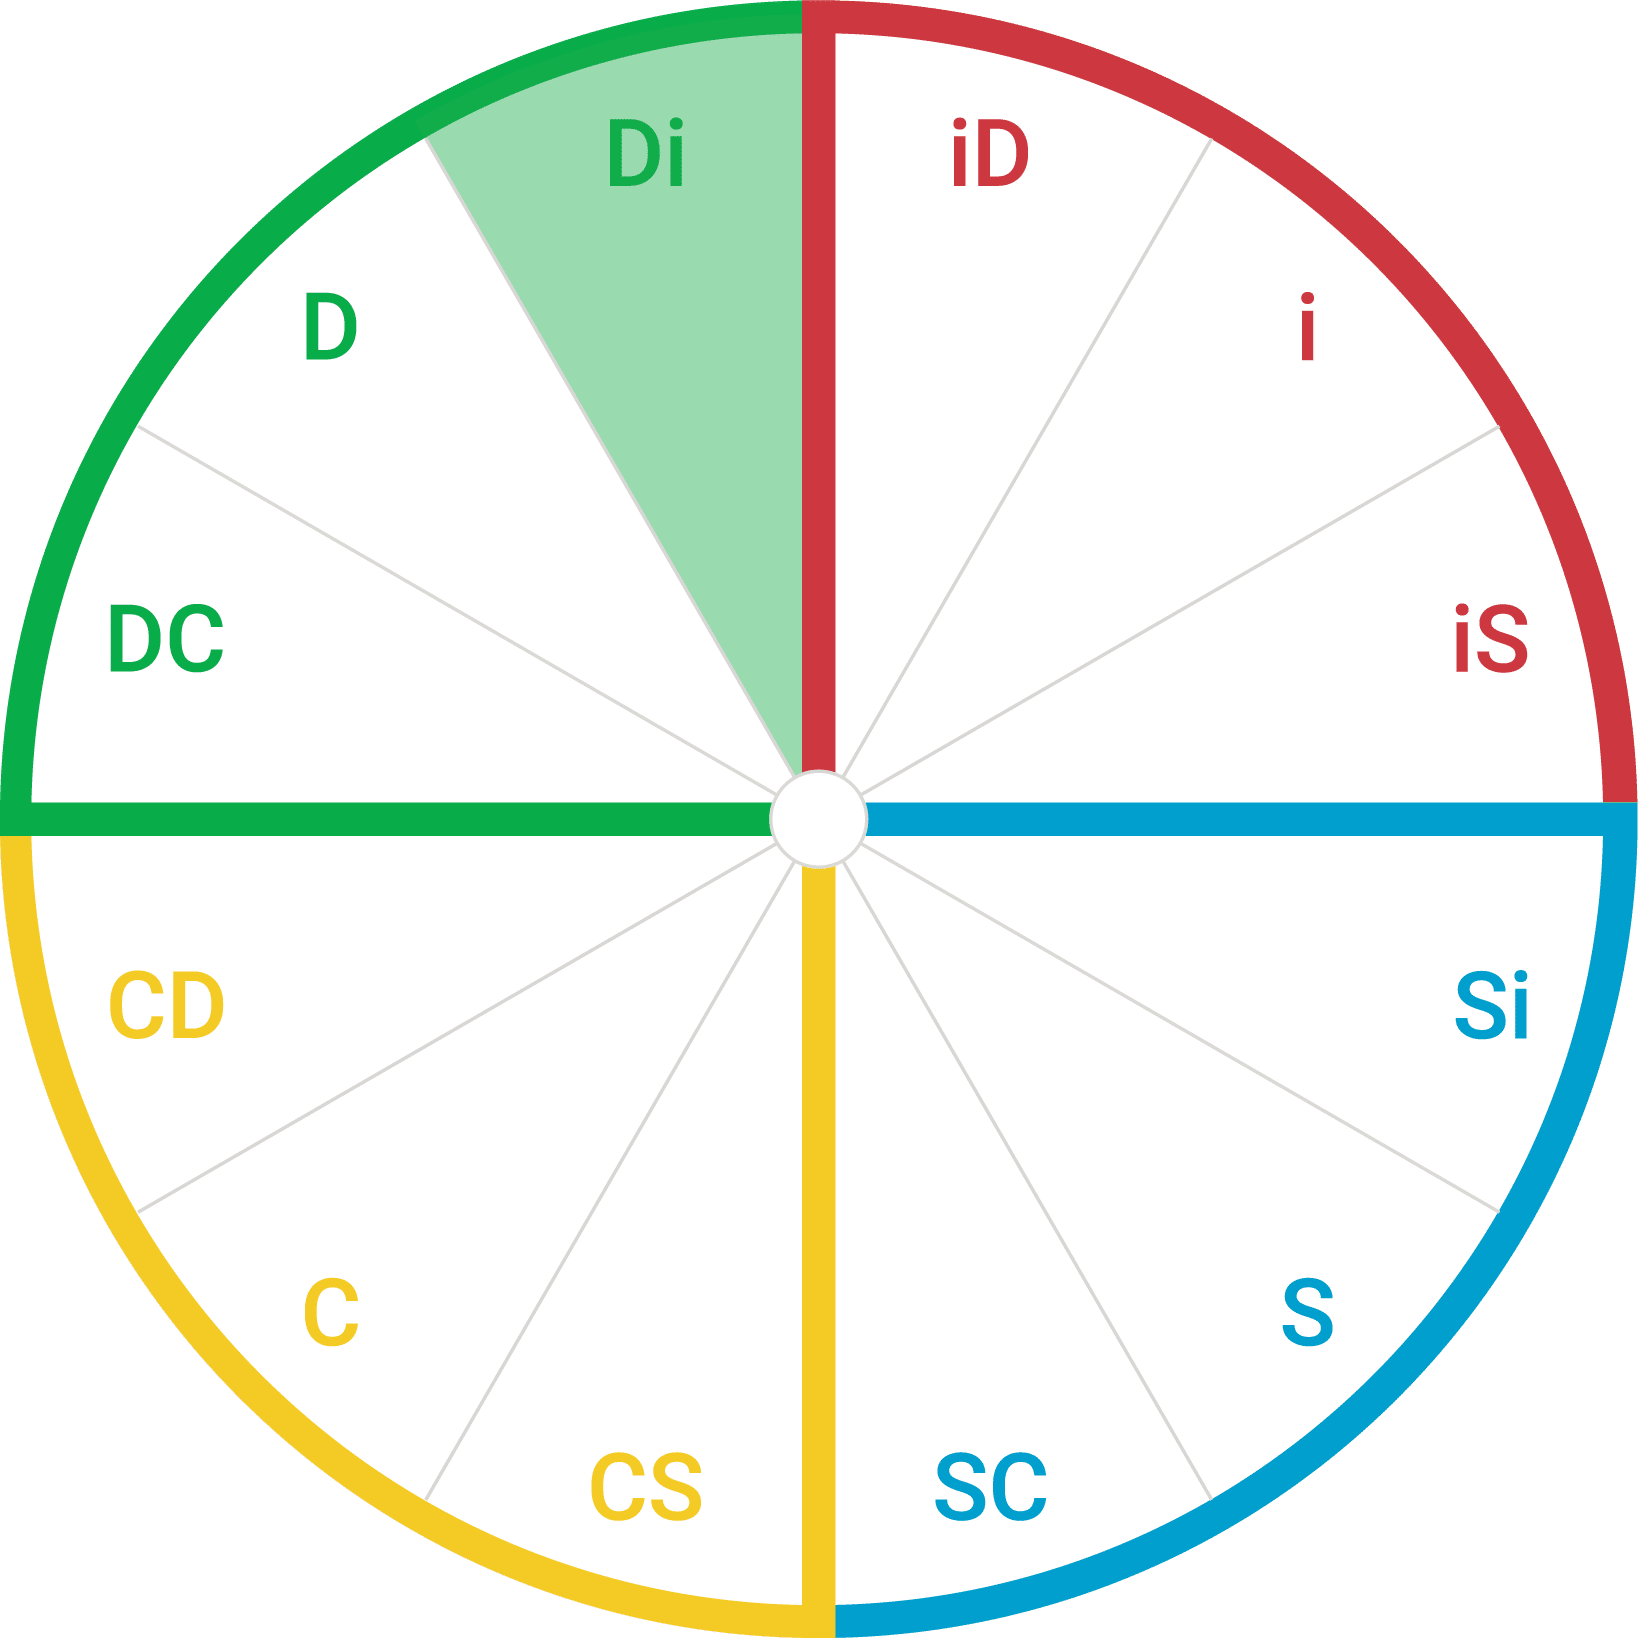 Circle showing the 12 style wedges. The Di wedge is highlighted.